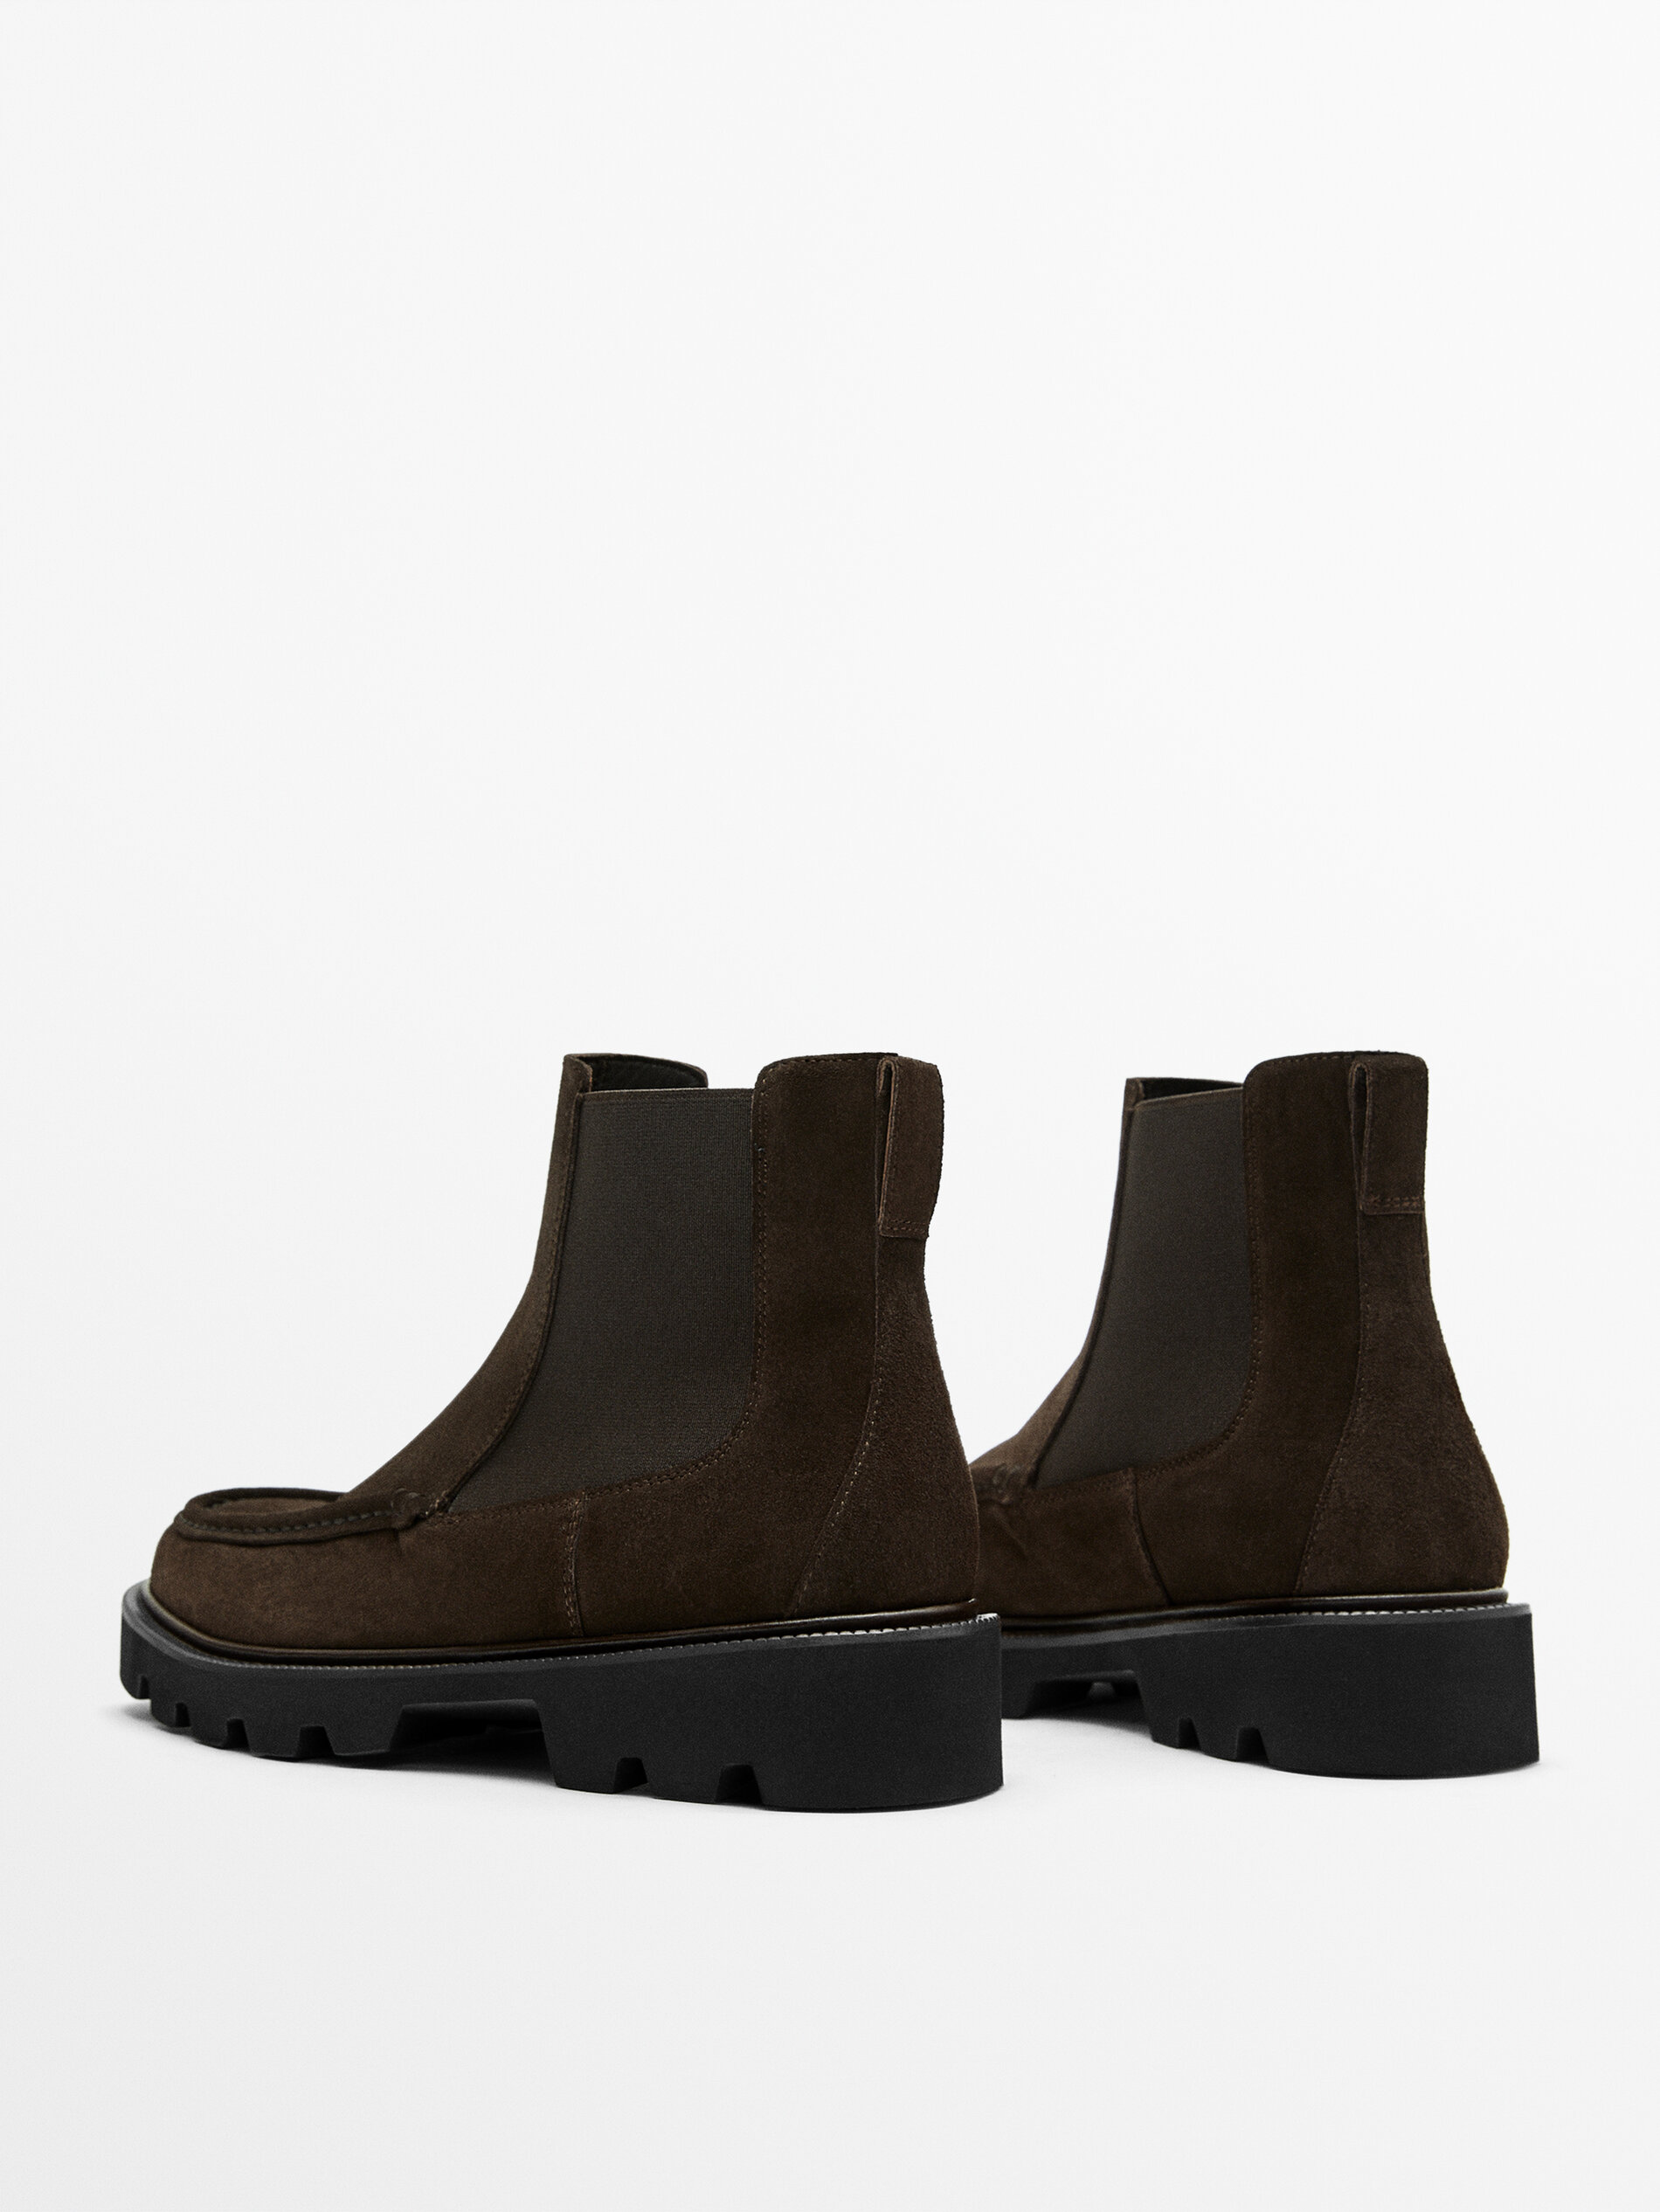 Brown split suede Chelsea boots with moc toe detail